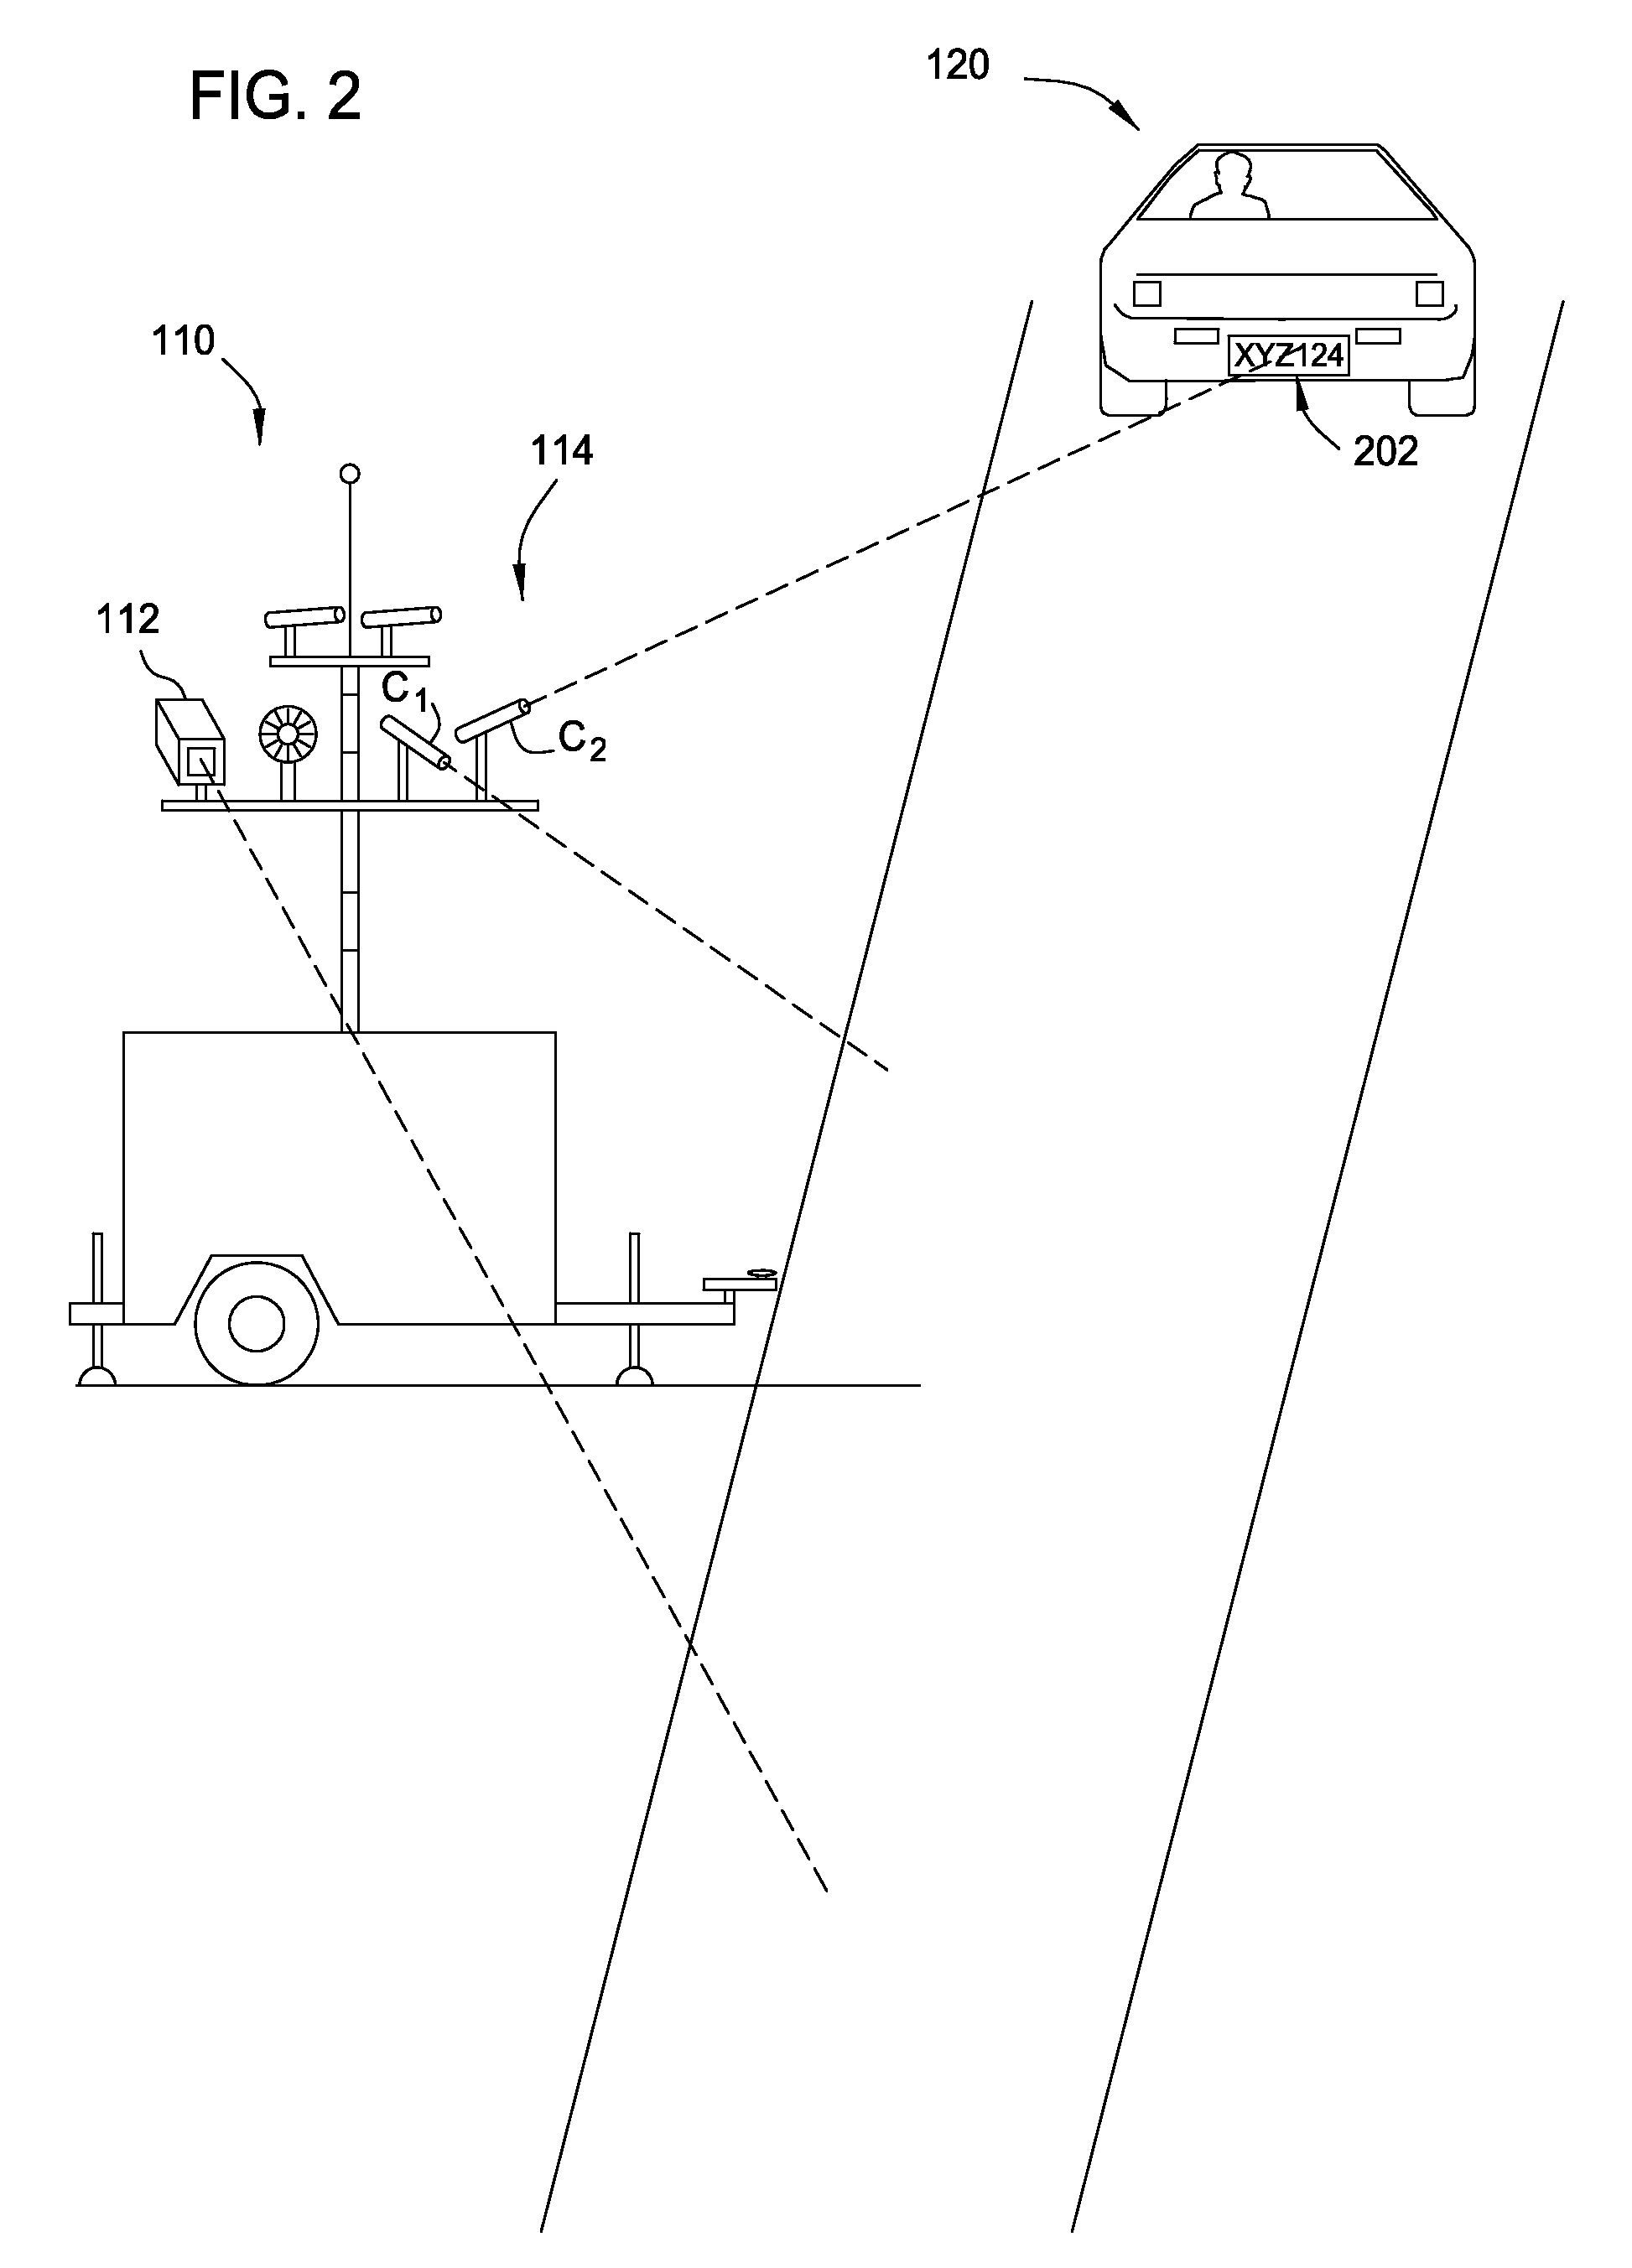 Portable traffic monitoring system and methods for use